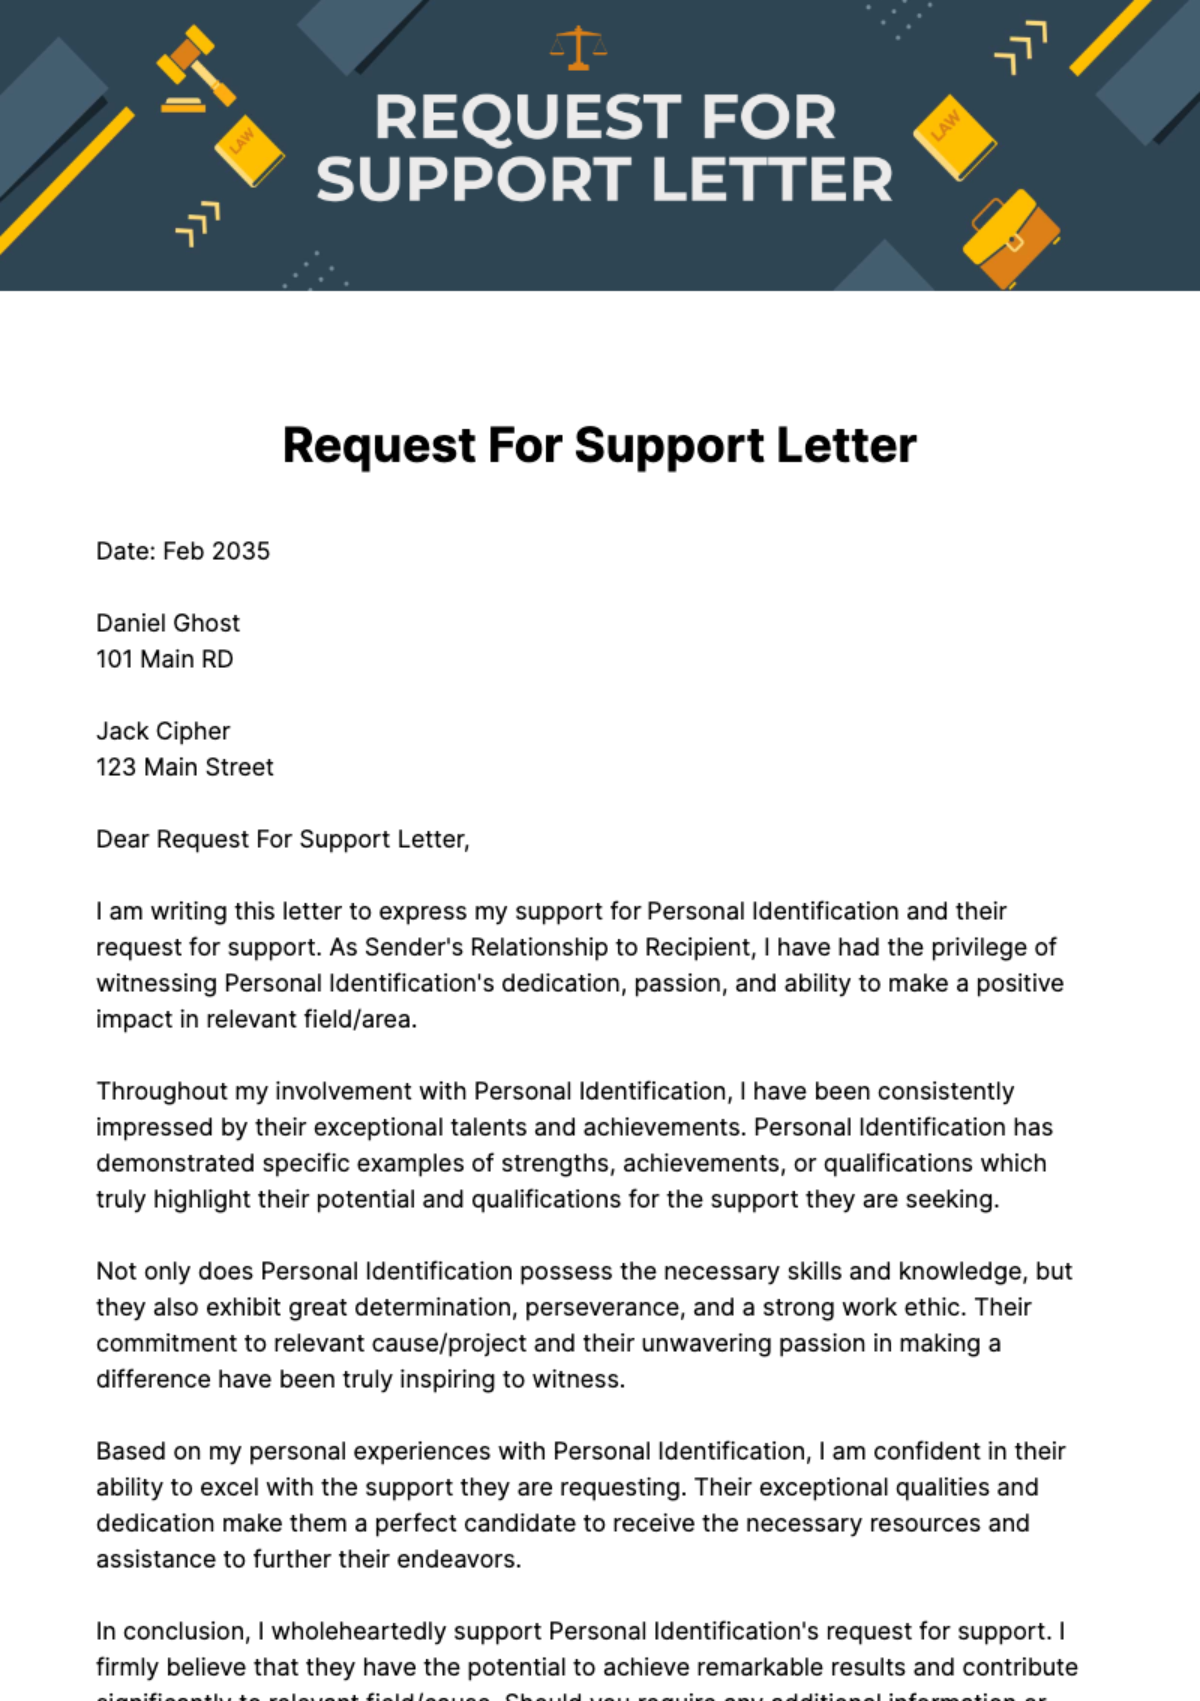 Free Request For Support Letter Template